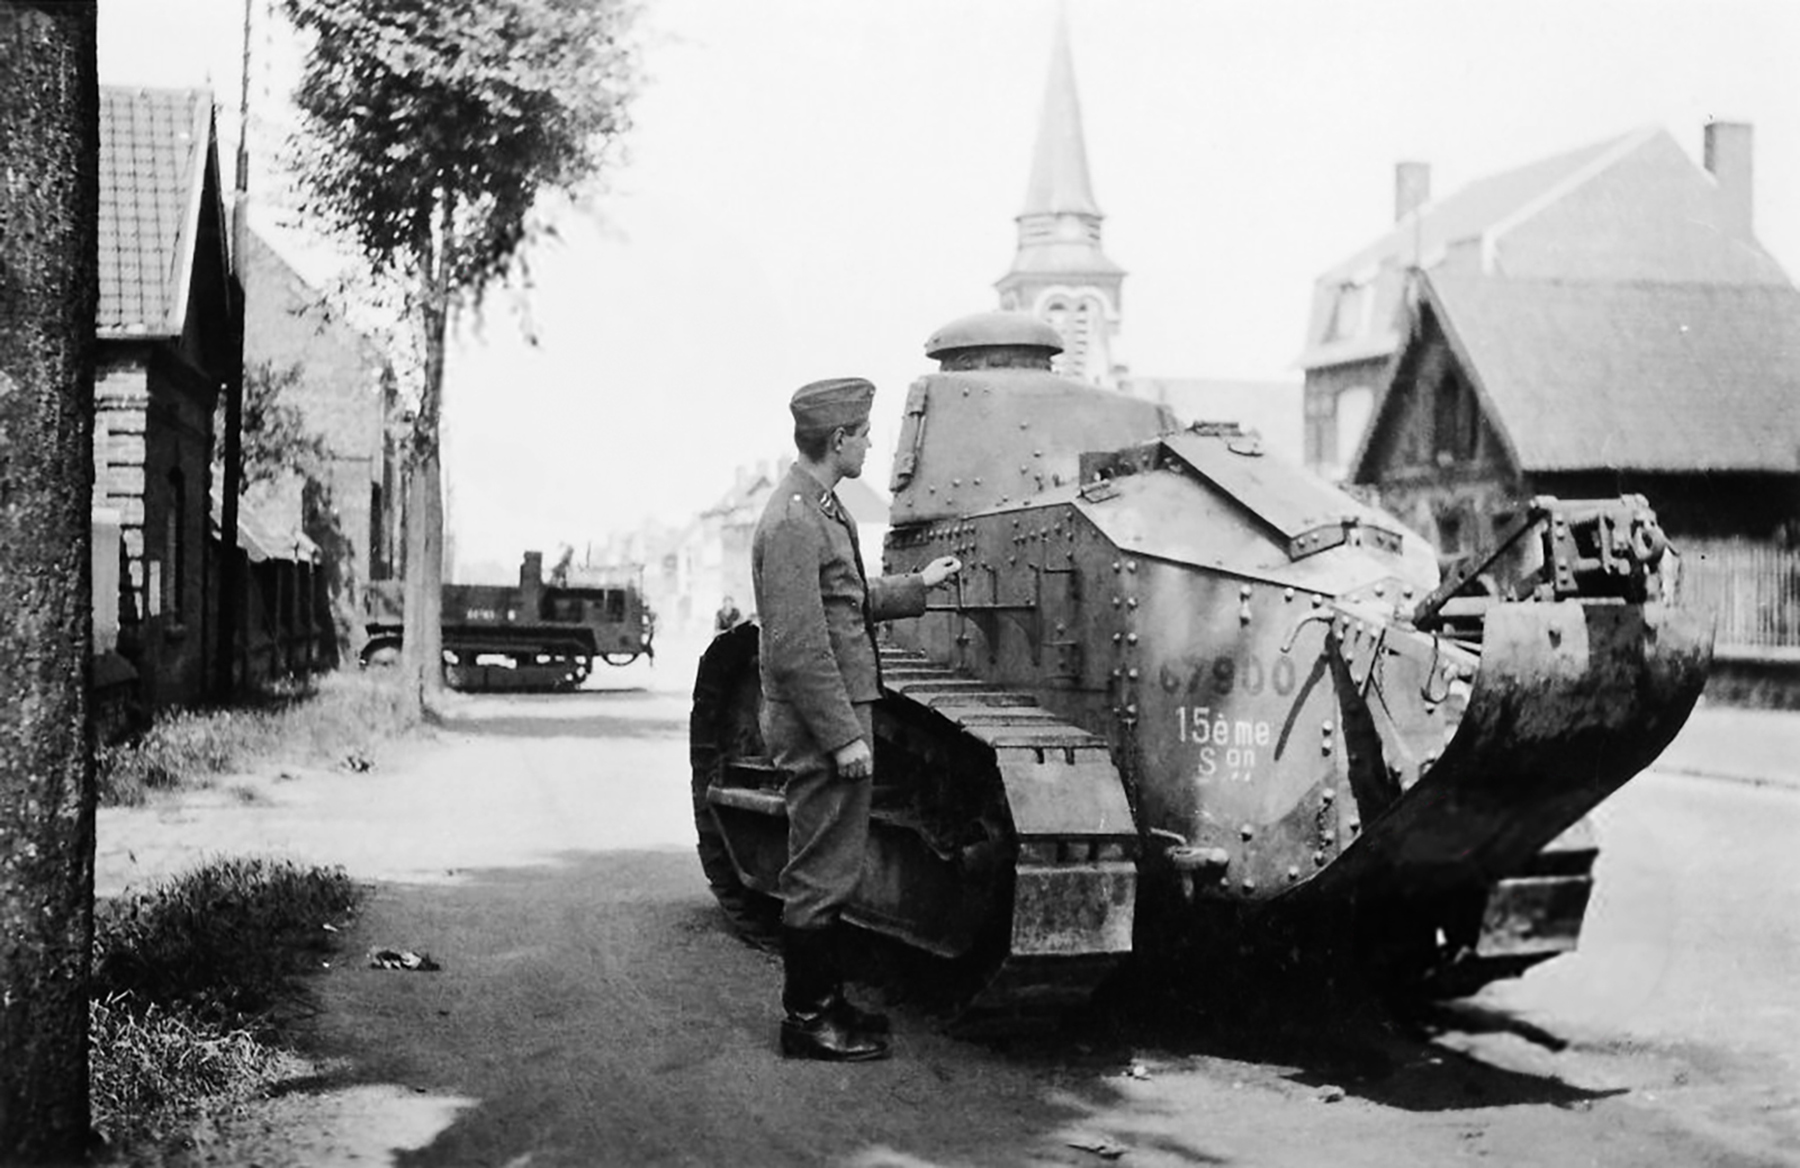 French Army Renault FT 31 tank sn 67900 being examined by German soldier after the fall of France 1940 01